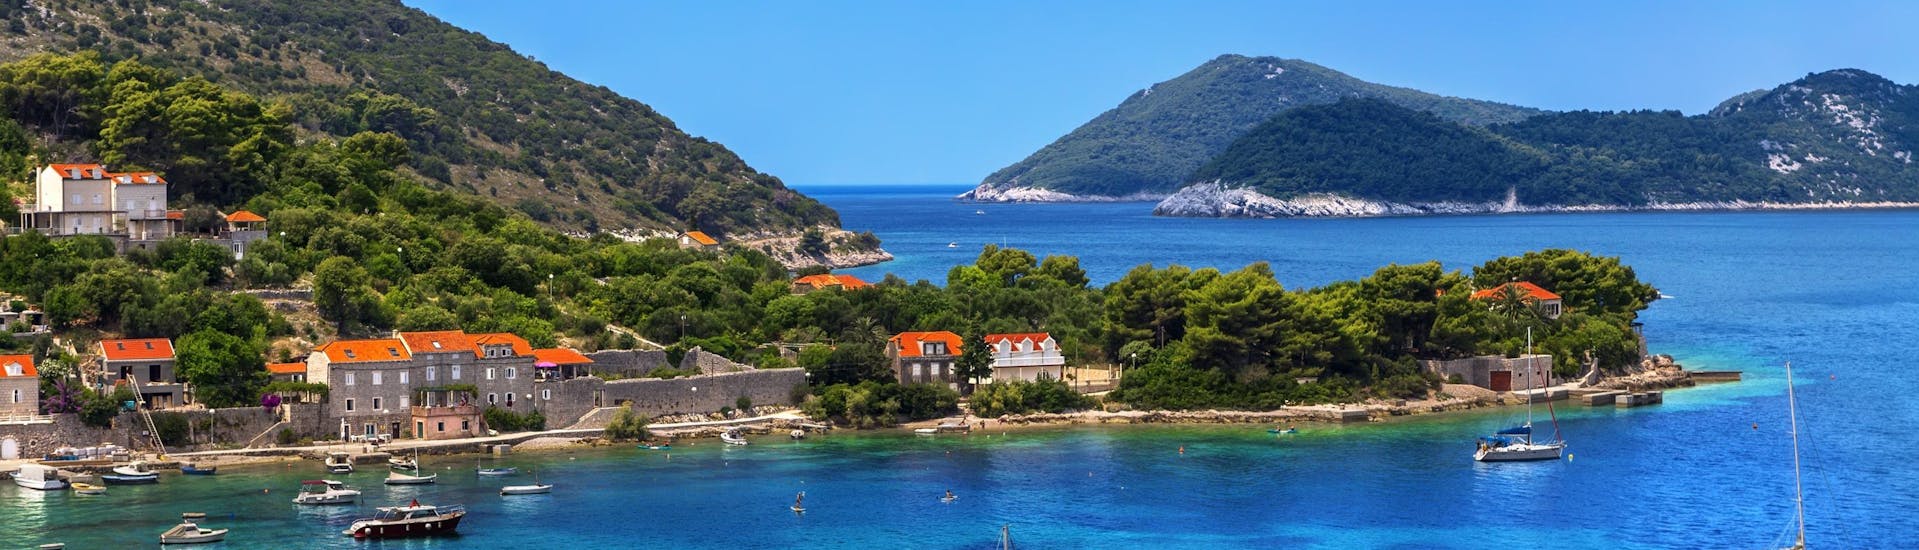 Picture of Kolocep Island, part of the Elaphiti Islands next to the coast of Dubrovnik, a popular destination for boat trips.